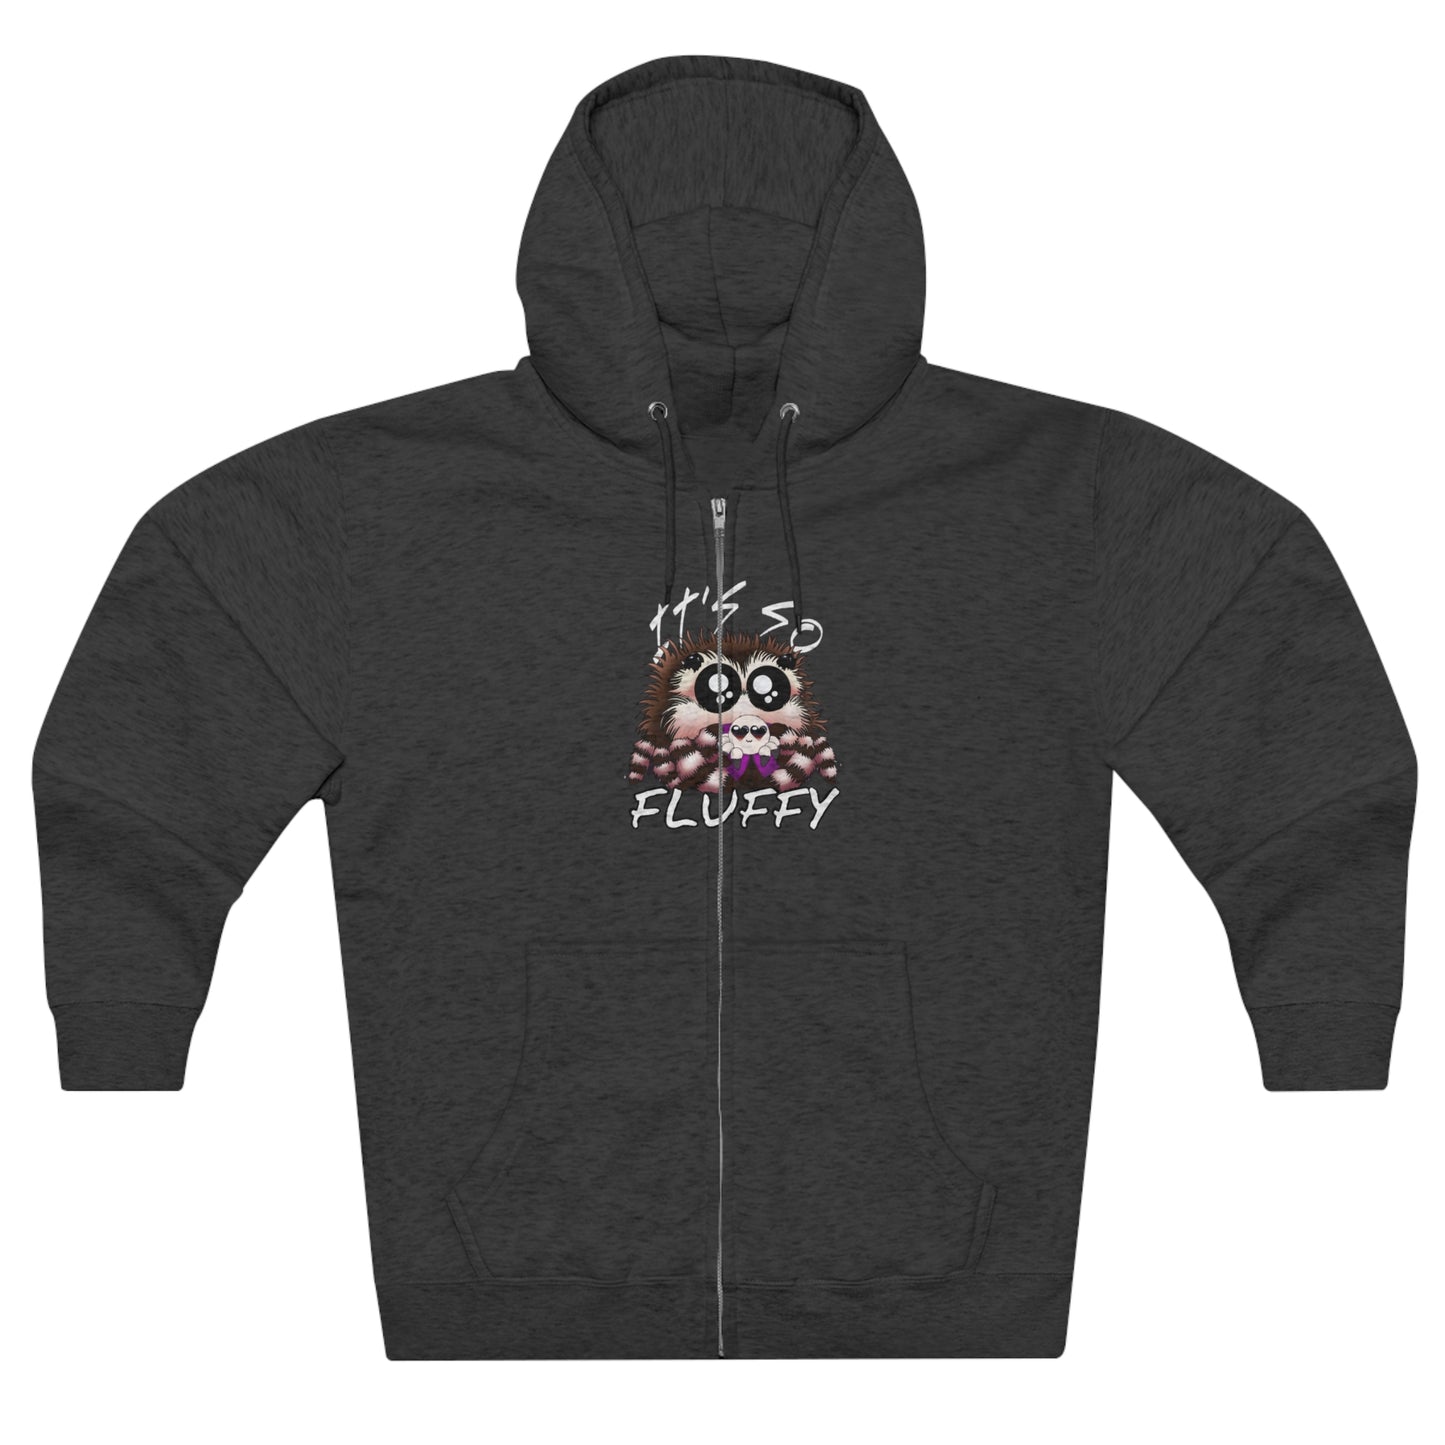 It’s So Fluffy! Zip Up Jumping Spider Hoodie